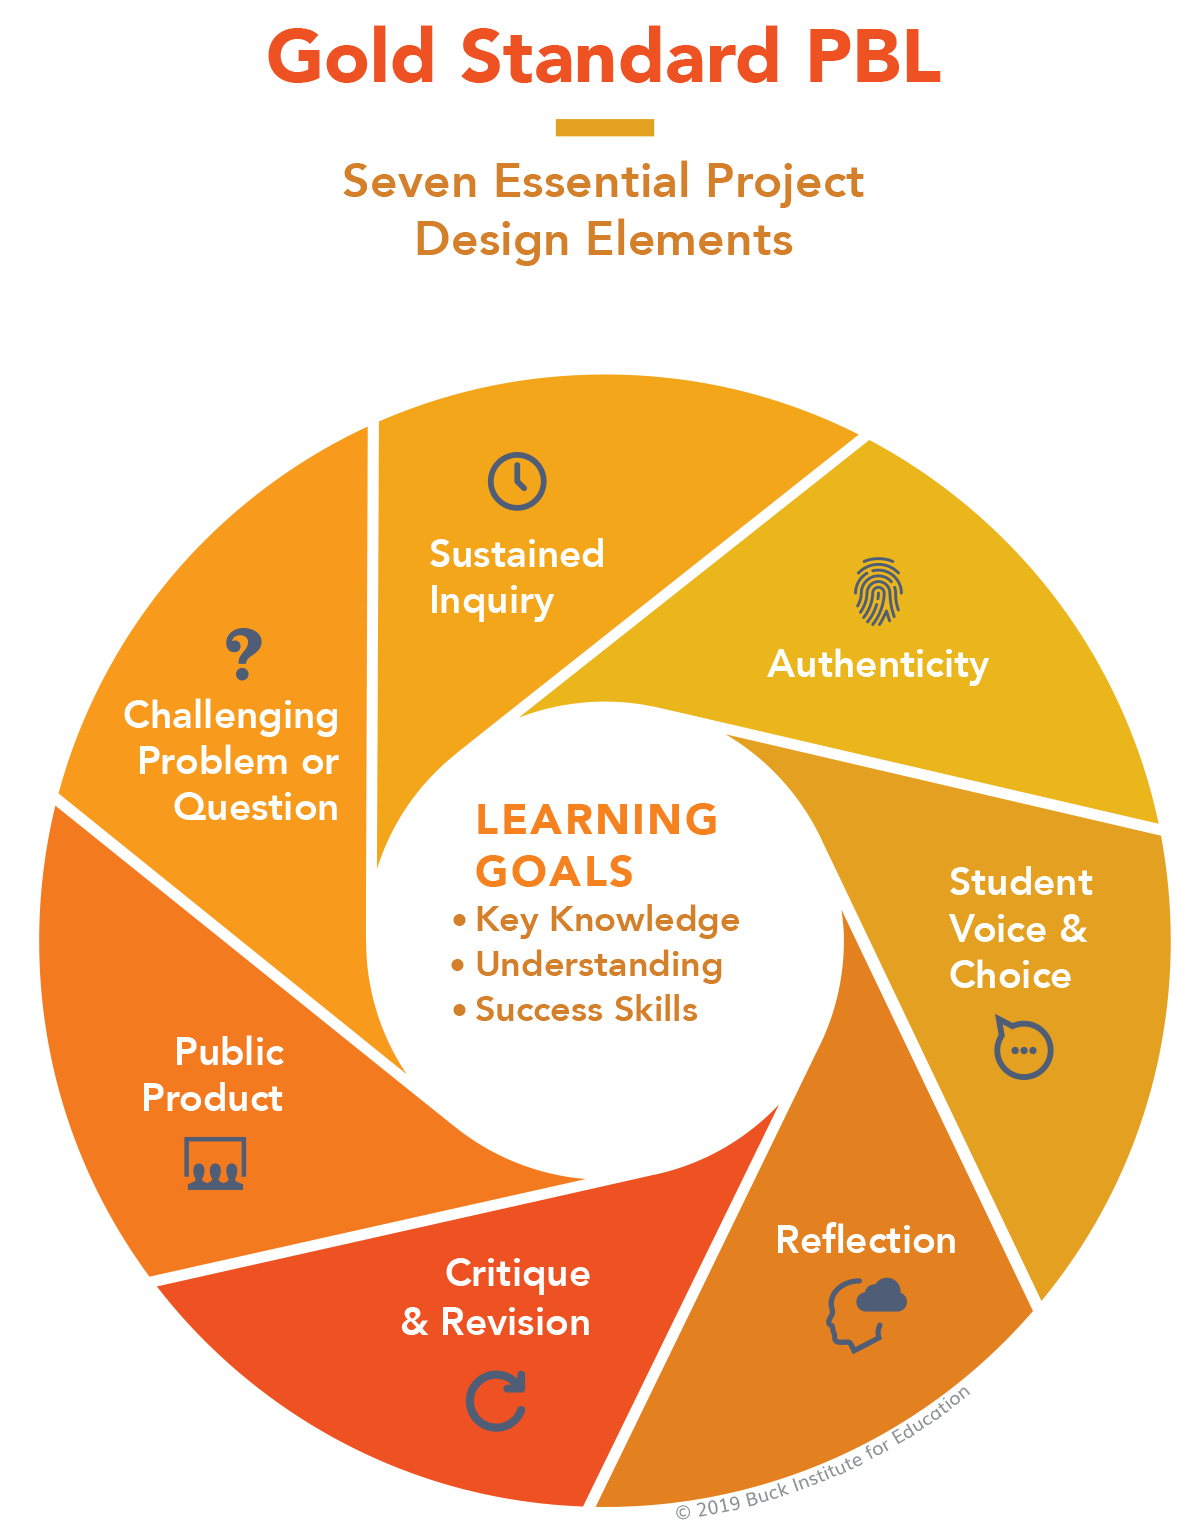 Gold Standard PBL. Seven Essential Project Design Elements. Wheel illustration has icons for each of the elements, as outlined below. At center of wheel is Learning Goals – Key Knowledge, Understanding, and Success Skills.